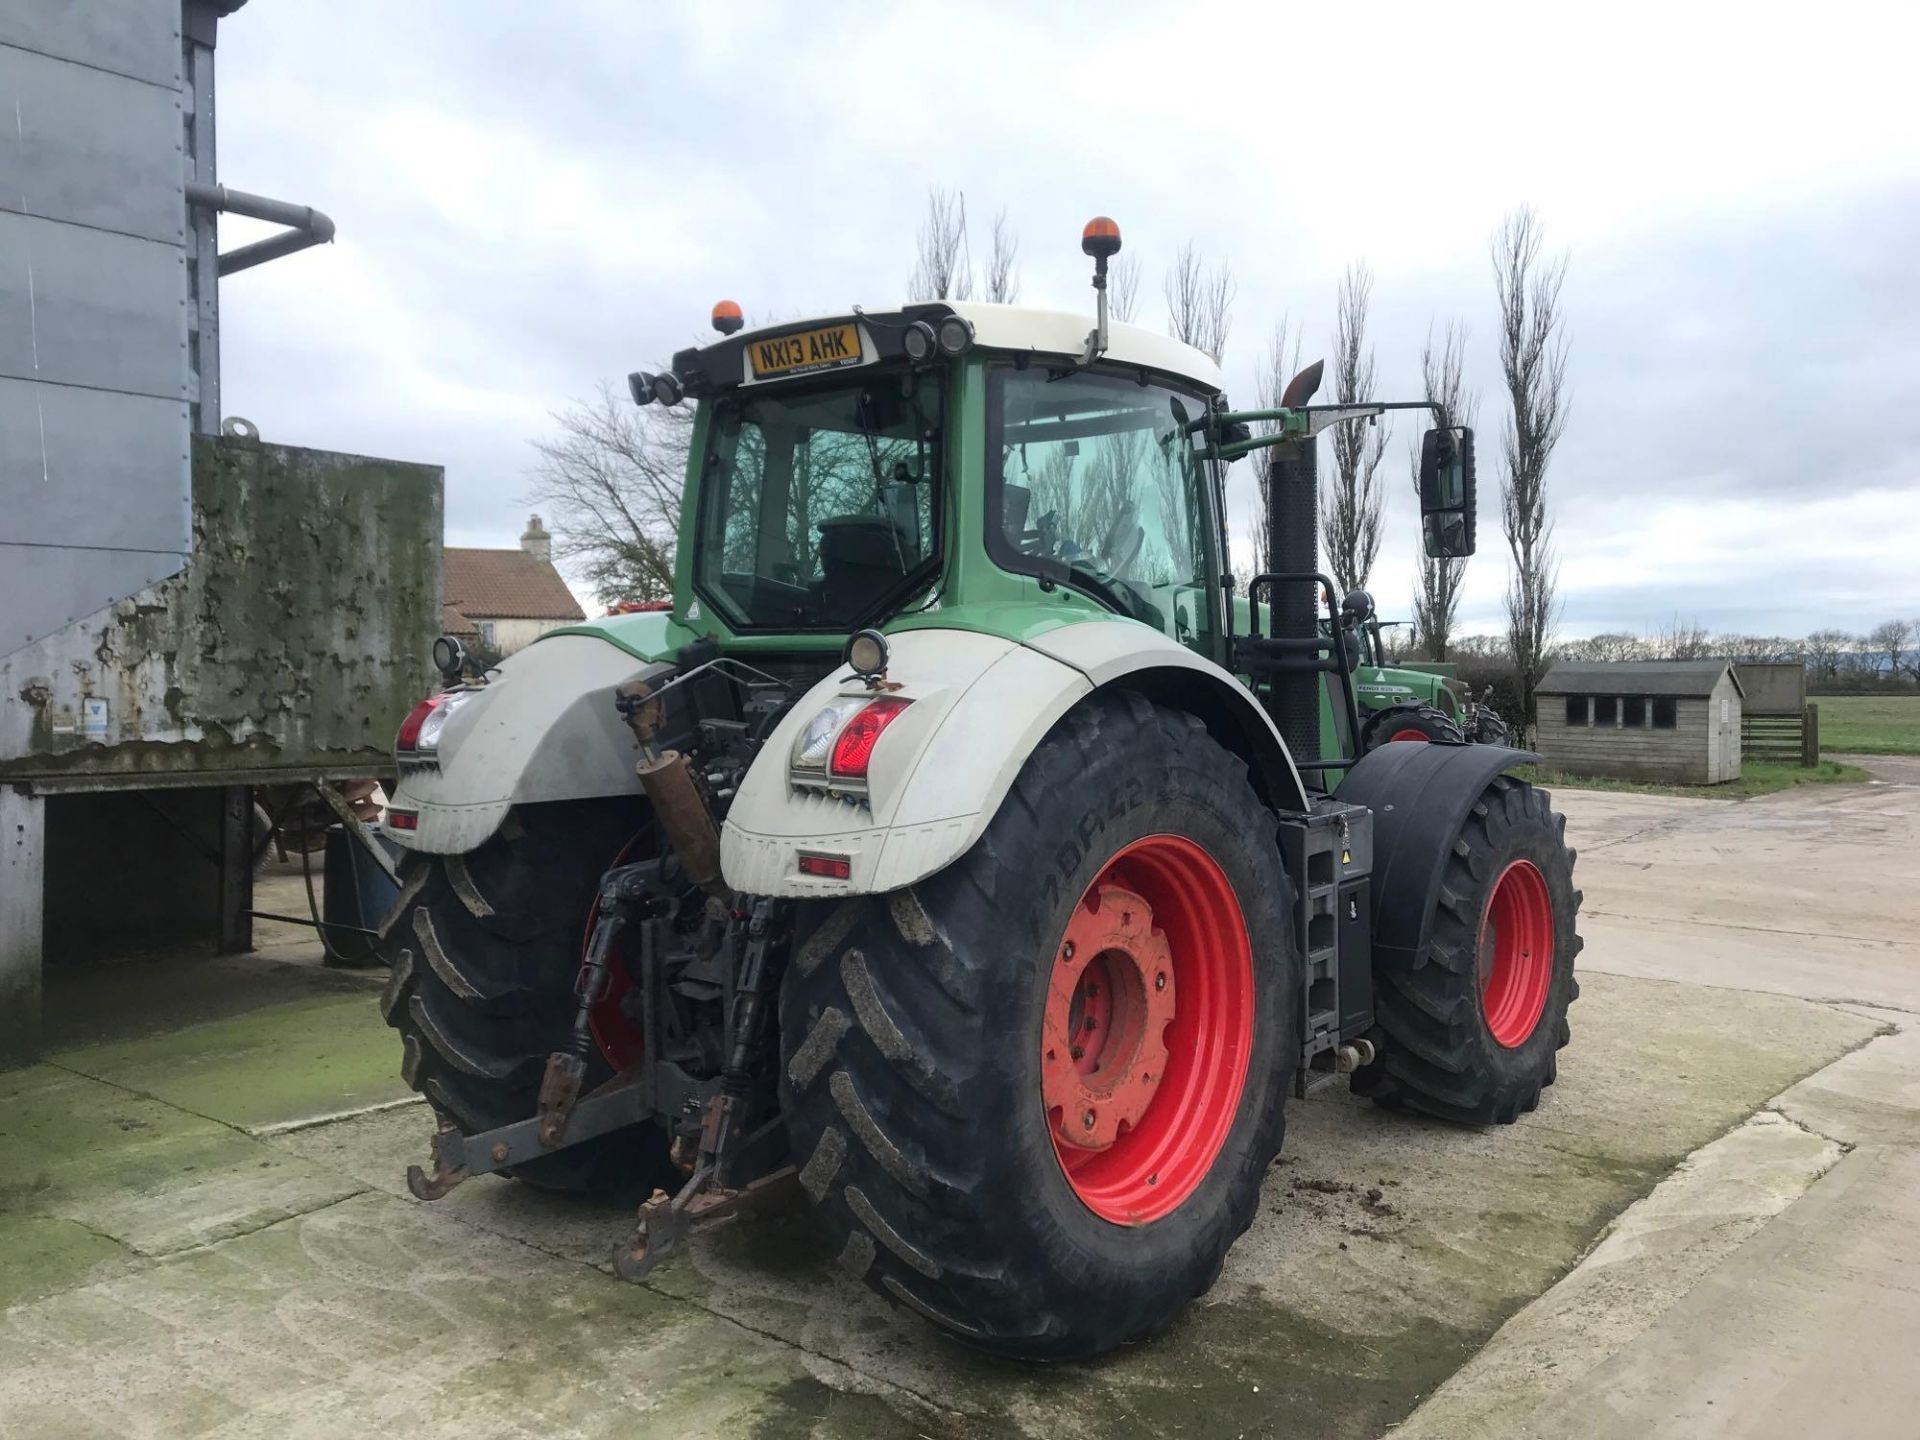 2013 Fendt 828 Vario tractor, 4wd, front linkage, front spool valves, 4No rear spool valves, Bill Be - Image 3 of 23